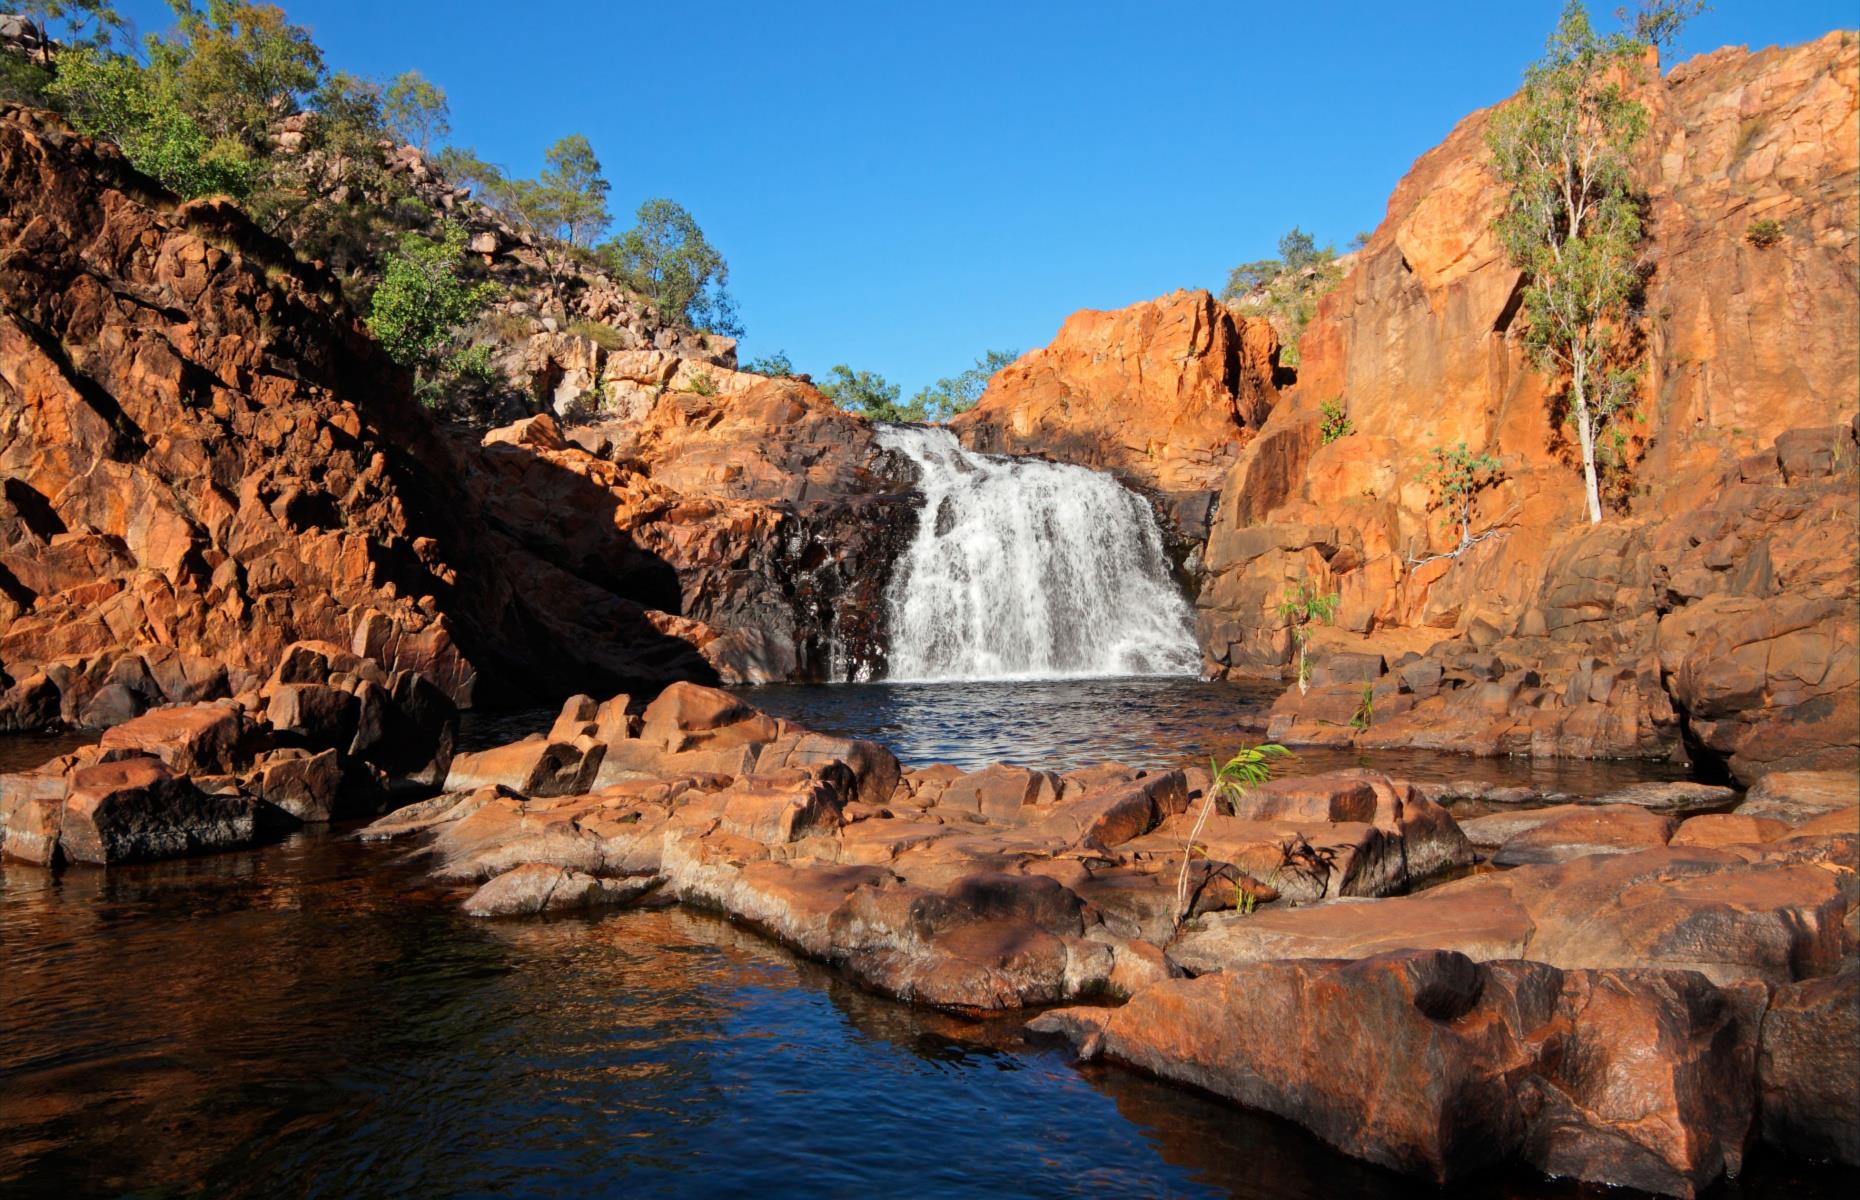 <p>Rugged and remote, <a href="https://parksaustralia.gov.au/kakadu/">this expansive swathe of natural land</a> is listed as a World Heritage Site because of its cultural significance and natural beauty. Traditionally inhabited by the Bininj/Mungguy people, the park features more than 5,000 rock art sites representing some of the oldest Indigenous art in the world. The non-human aspects of the park are impressive too, with lush rainforests, wild crocodiles and isolated spots to swim in while soaking up the majesty of the park.</p>